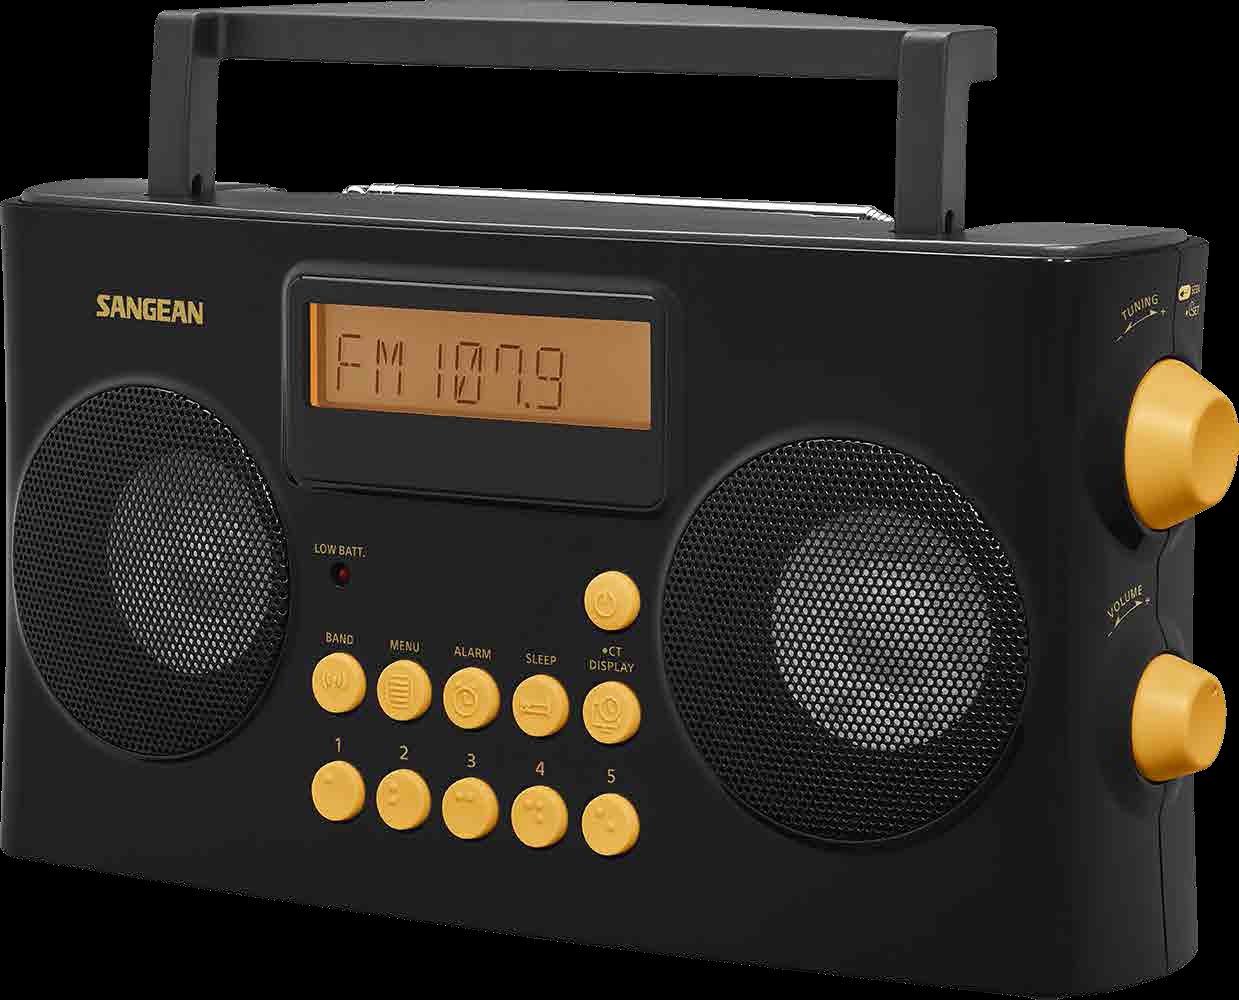 Sangean-PR-D17 AM / FM-RDS Portable Radio Specially Designed for the Visually Impaired with Helpful Guided Voice Prompts